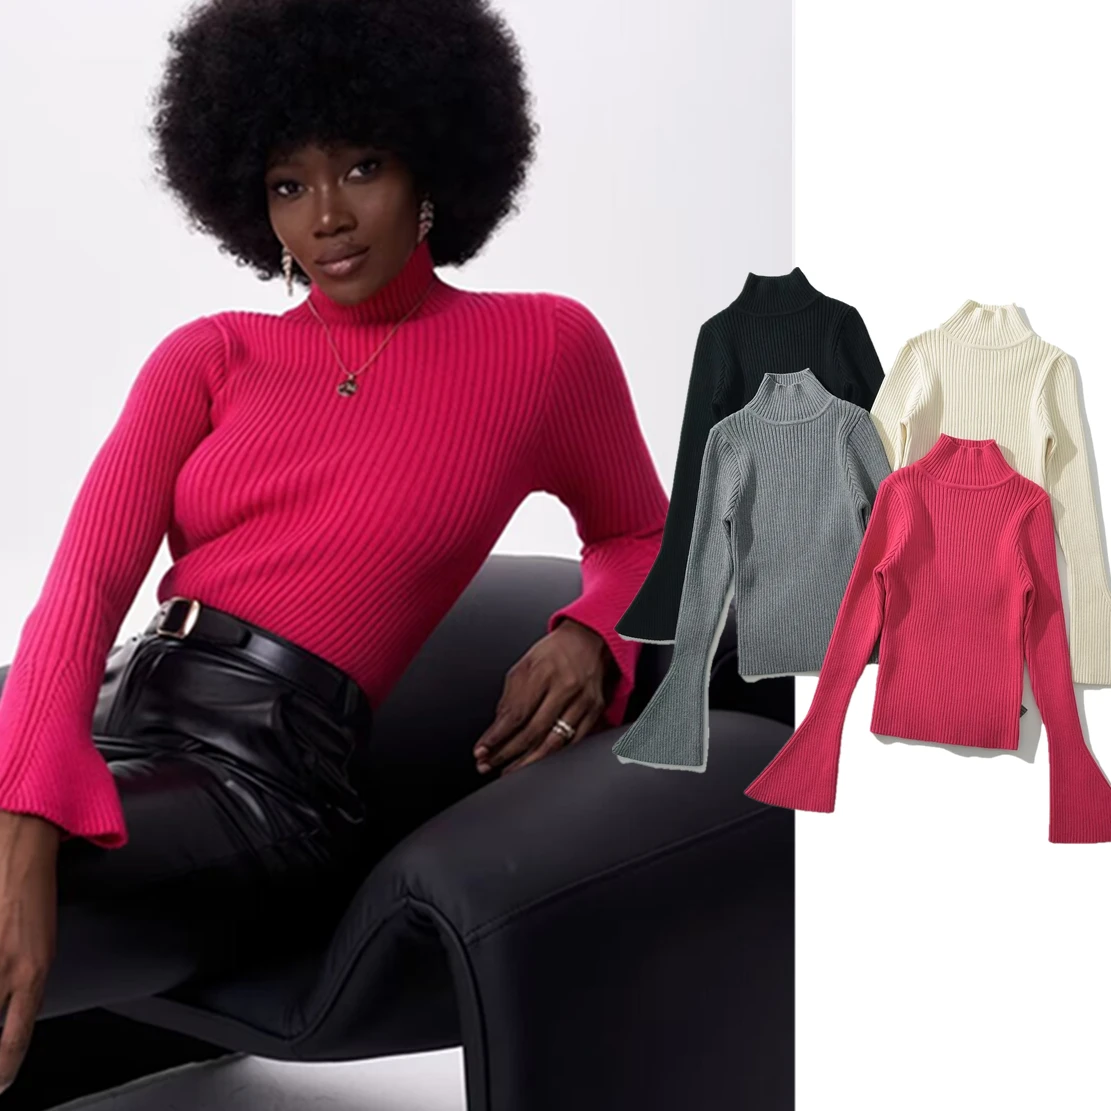 

Jenny&Dave High Neck Flare Sleeves Elegant Pullover Sweater Women French Fashion Women's Basic Knitwear Tops For Winter